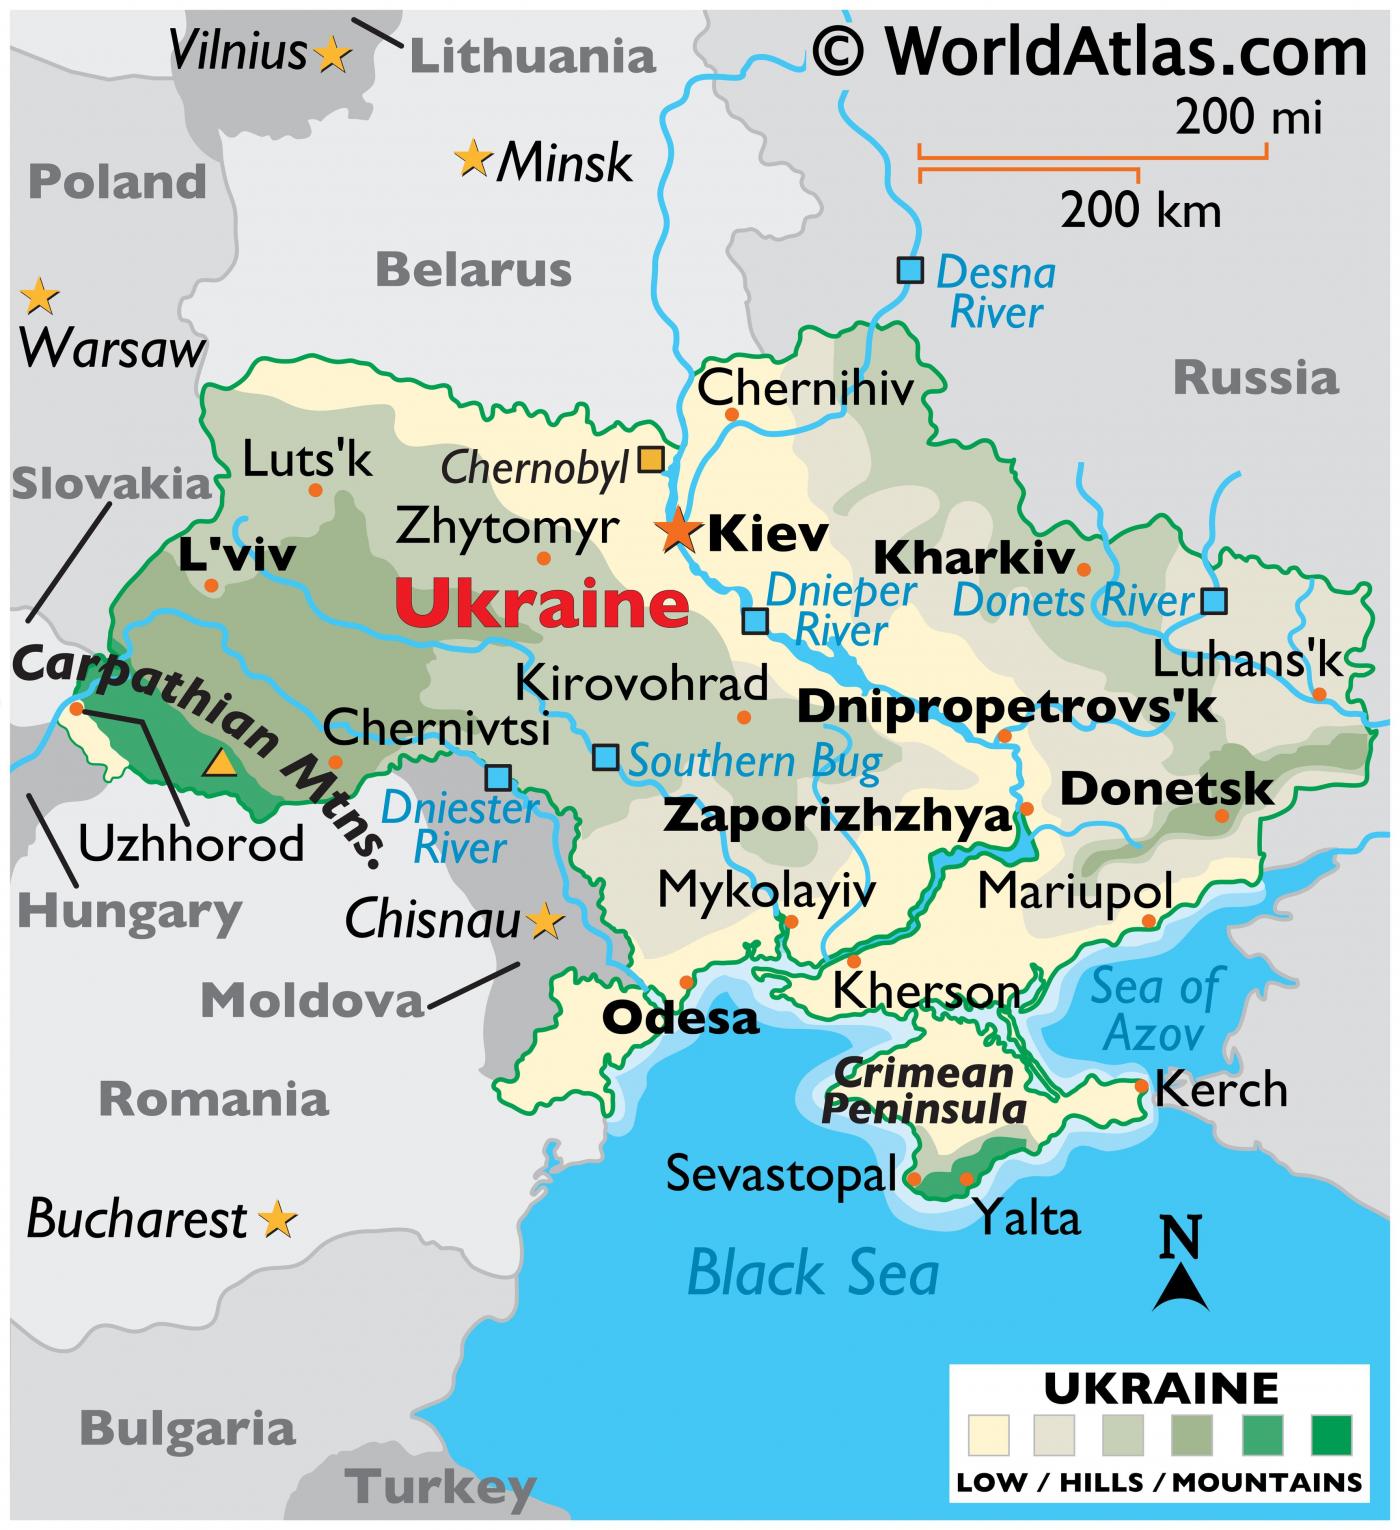 A map of Ukraine, showing the different regions of the country